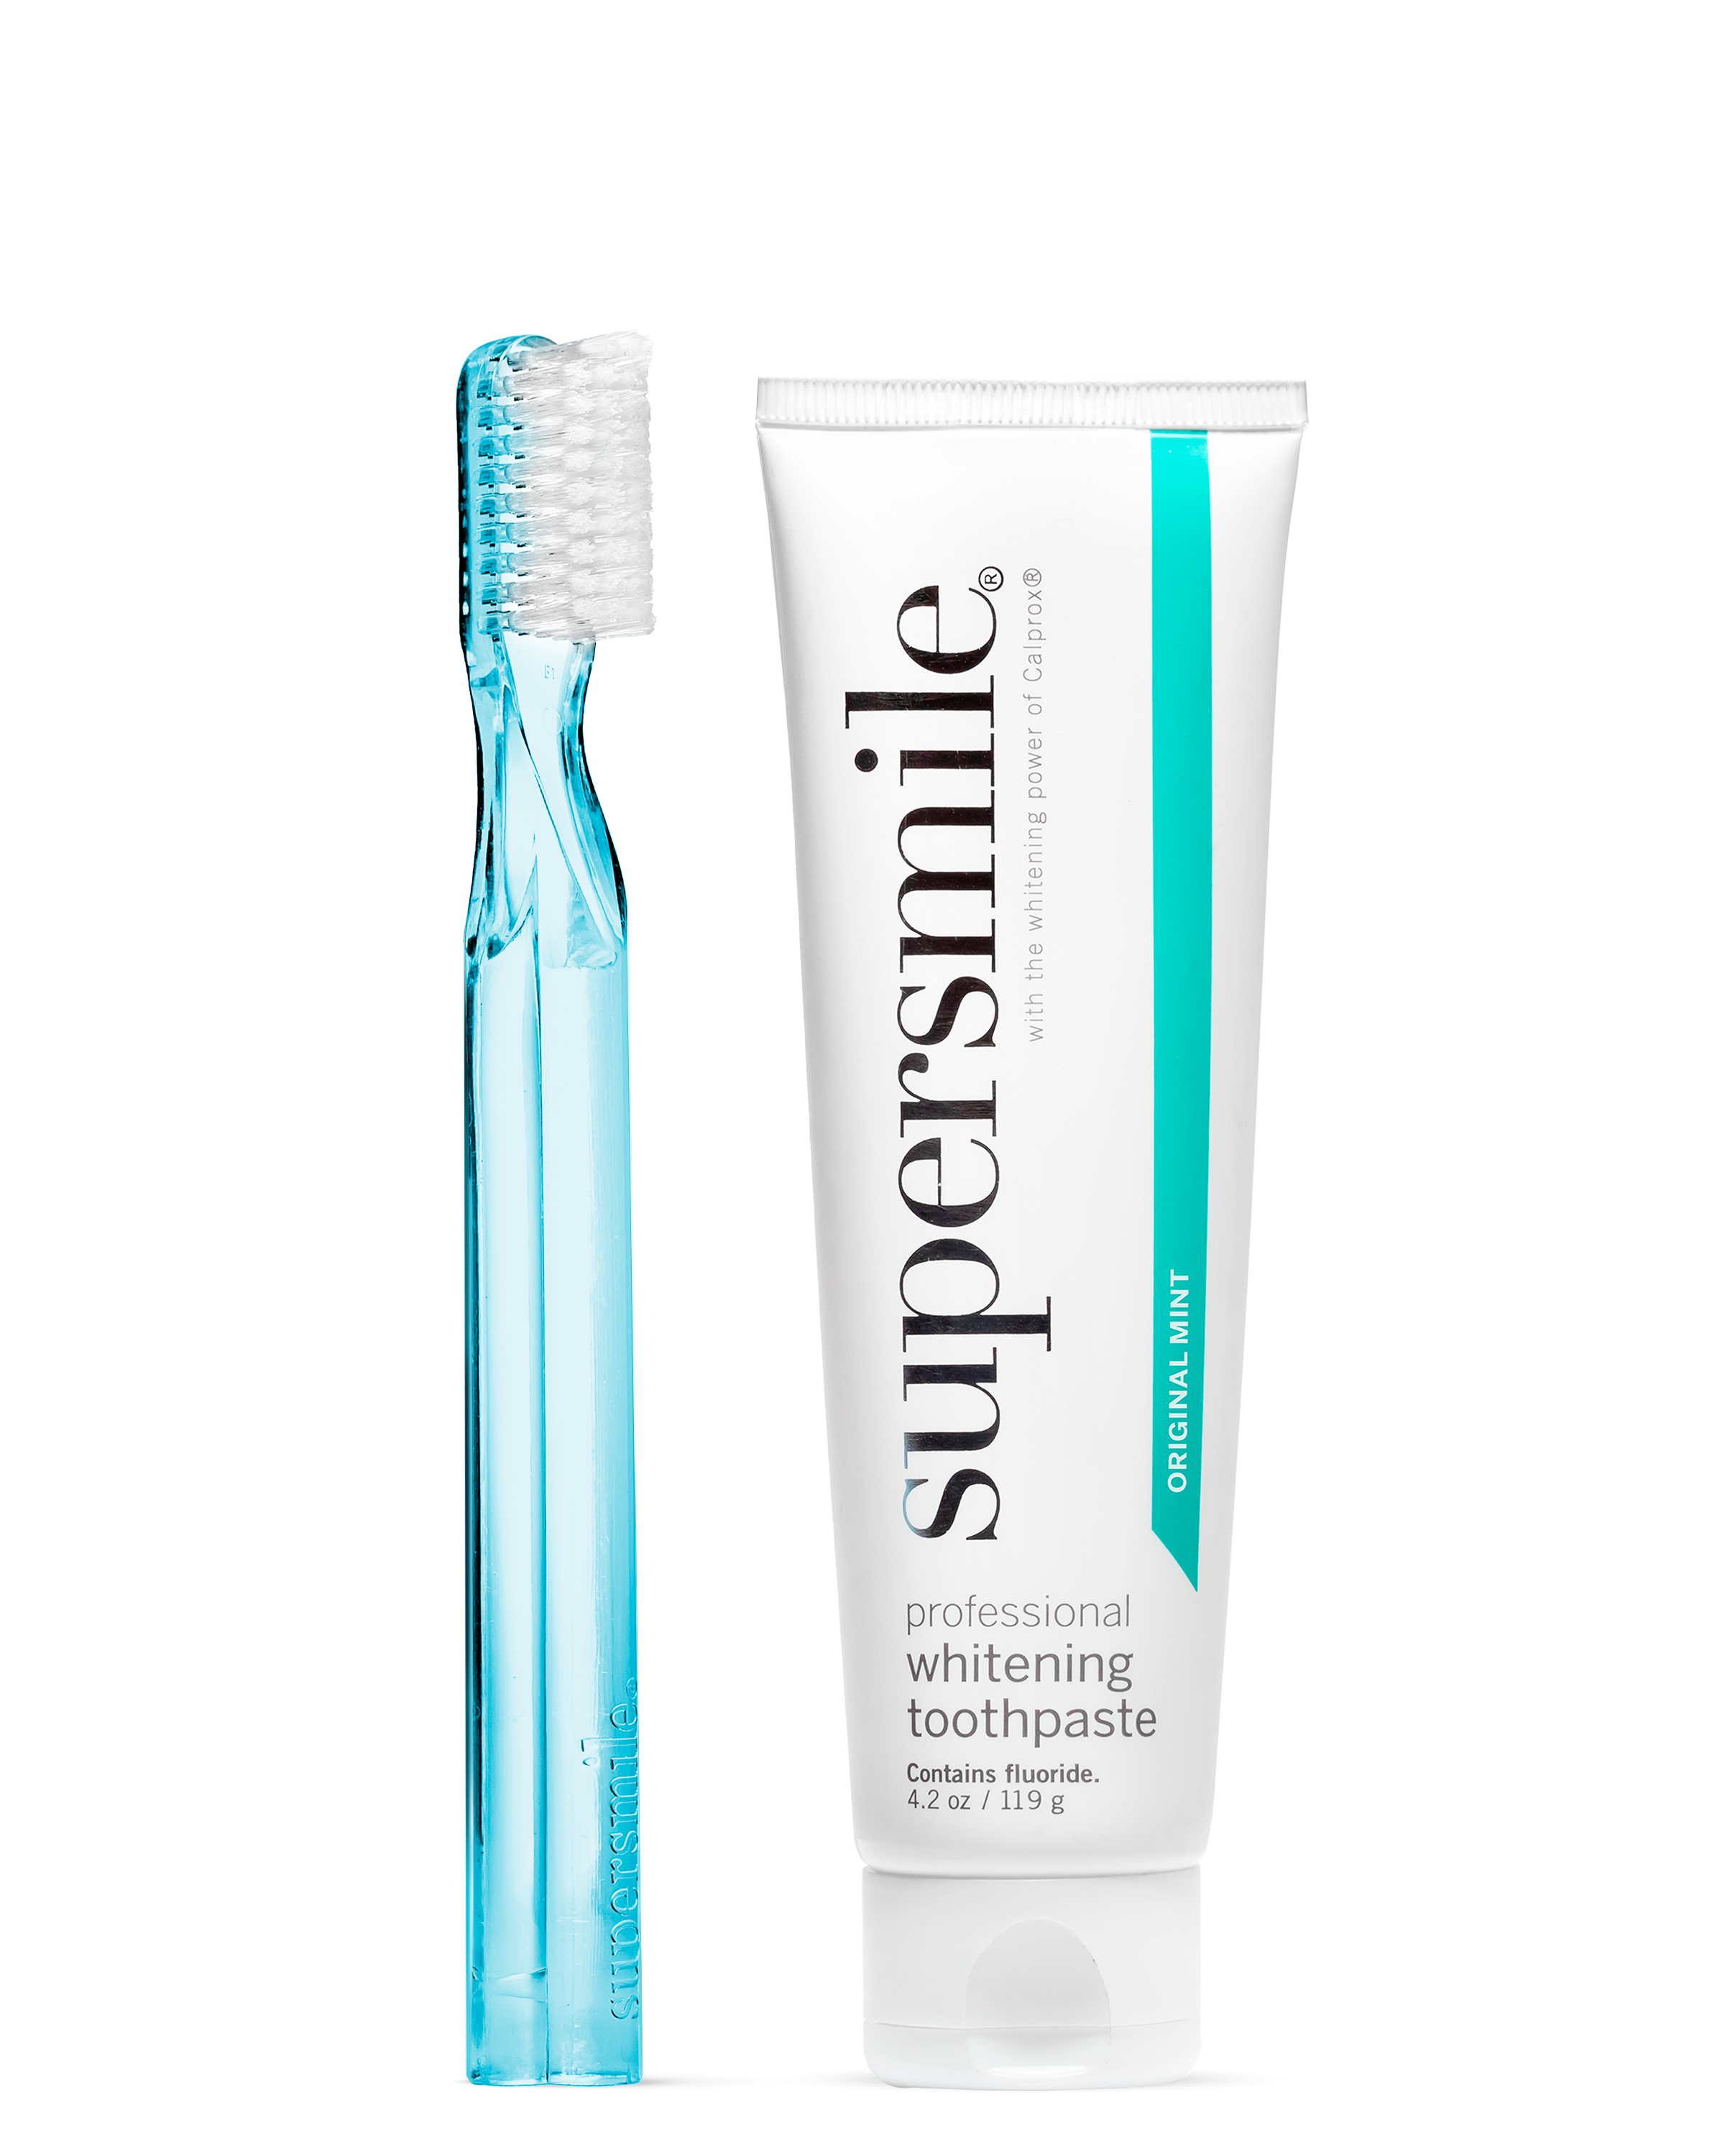 Blue 45 Degree Crystal Toothbrush + Original Mint Toothpaste